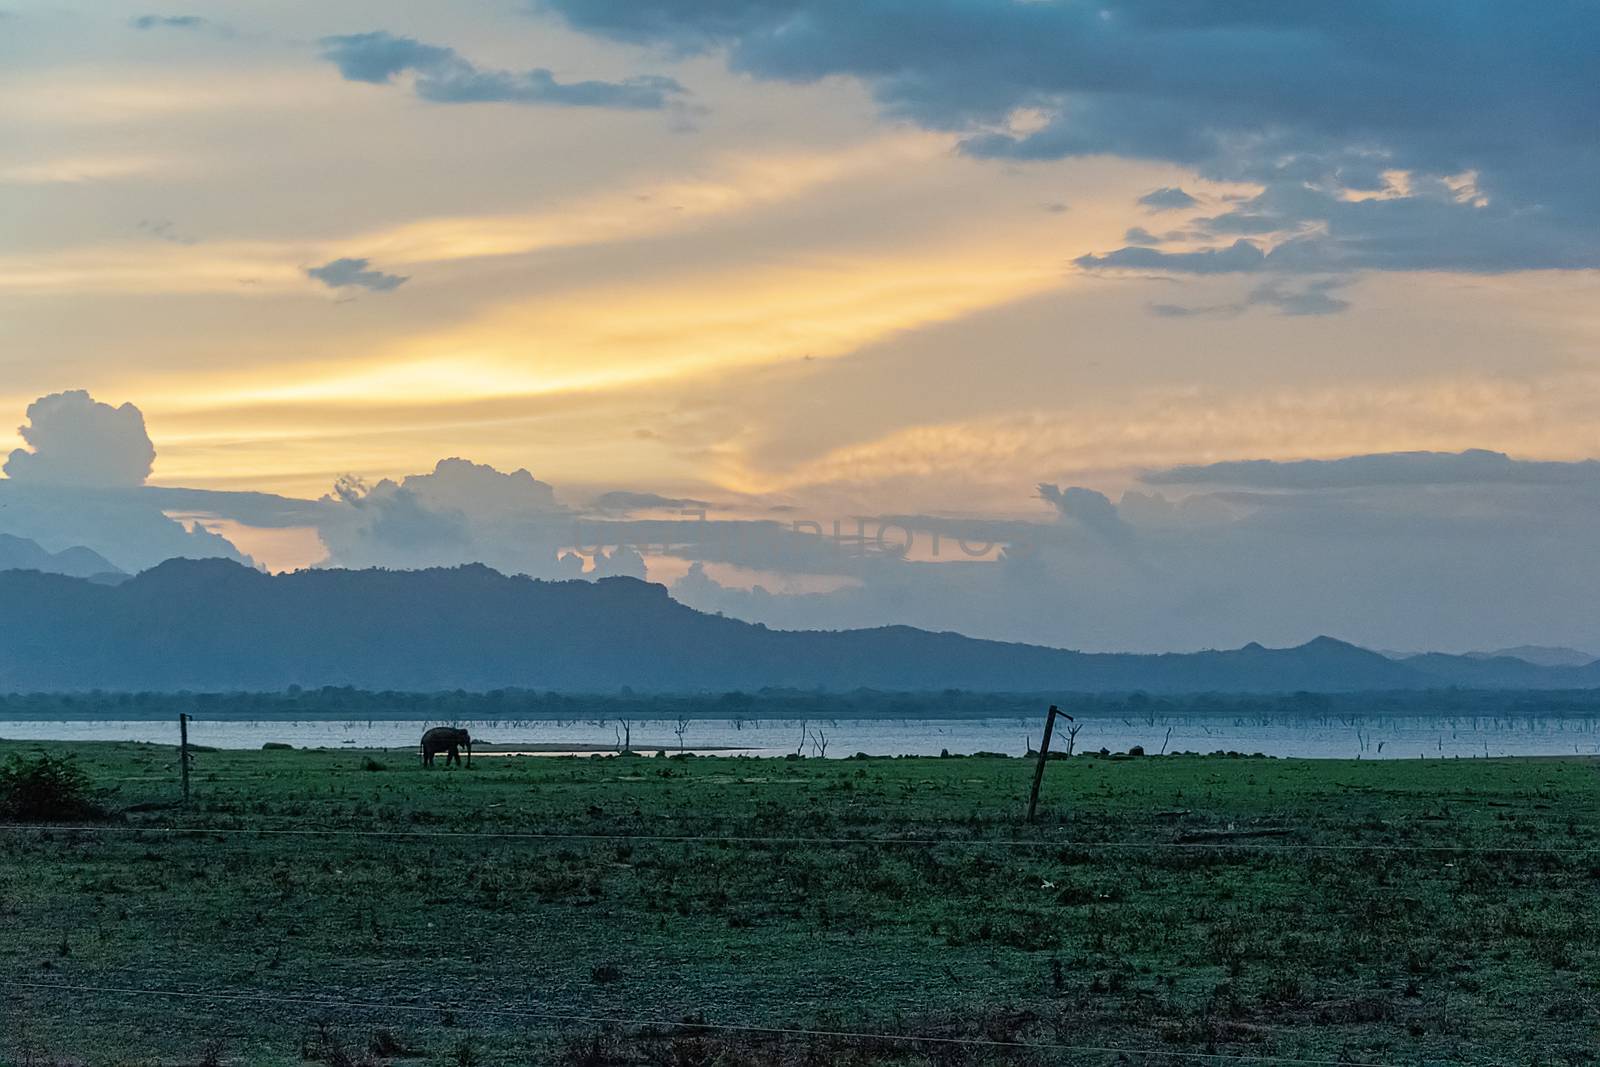 Distant Elephant st a lake in Udewalawe national park at sunset by mrs_vision